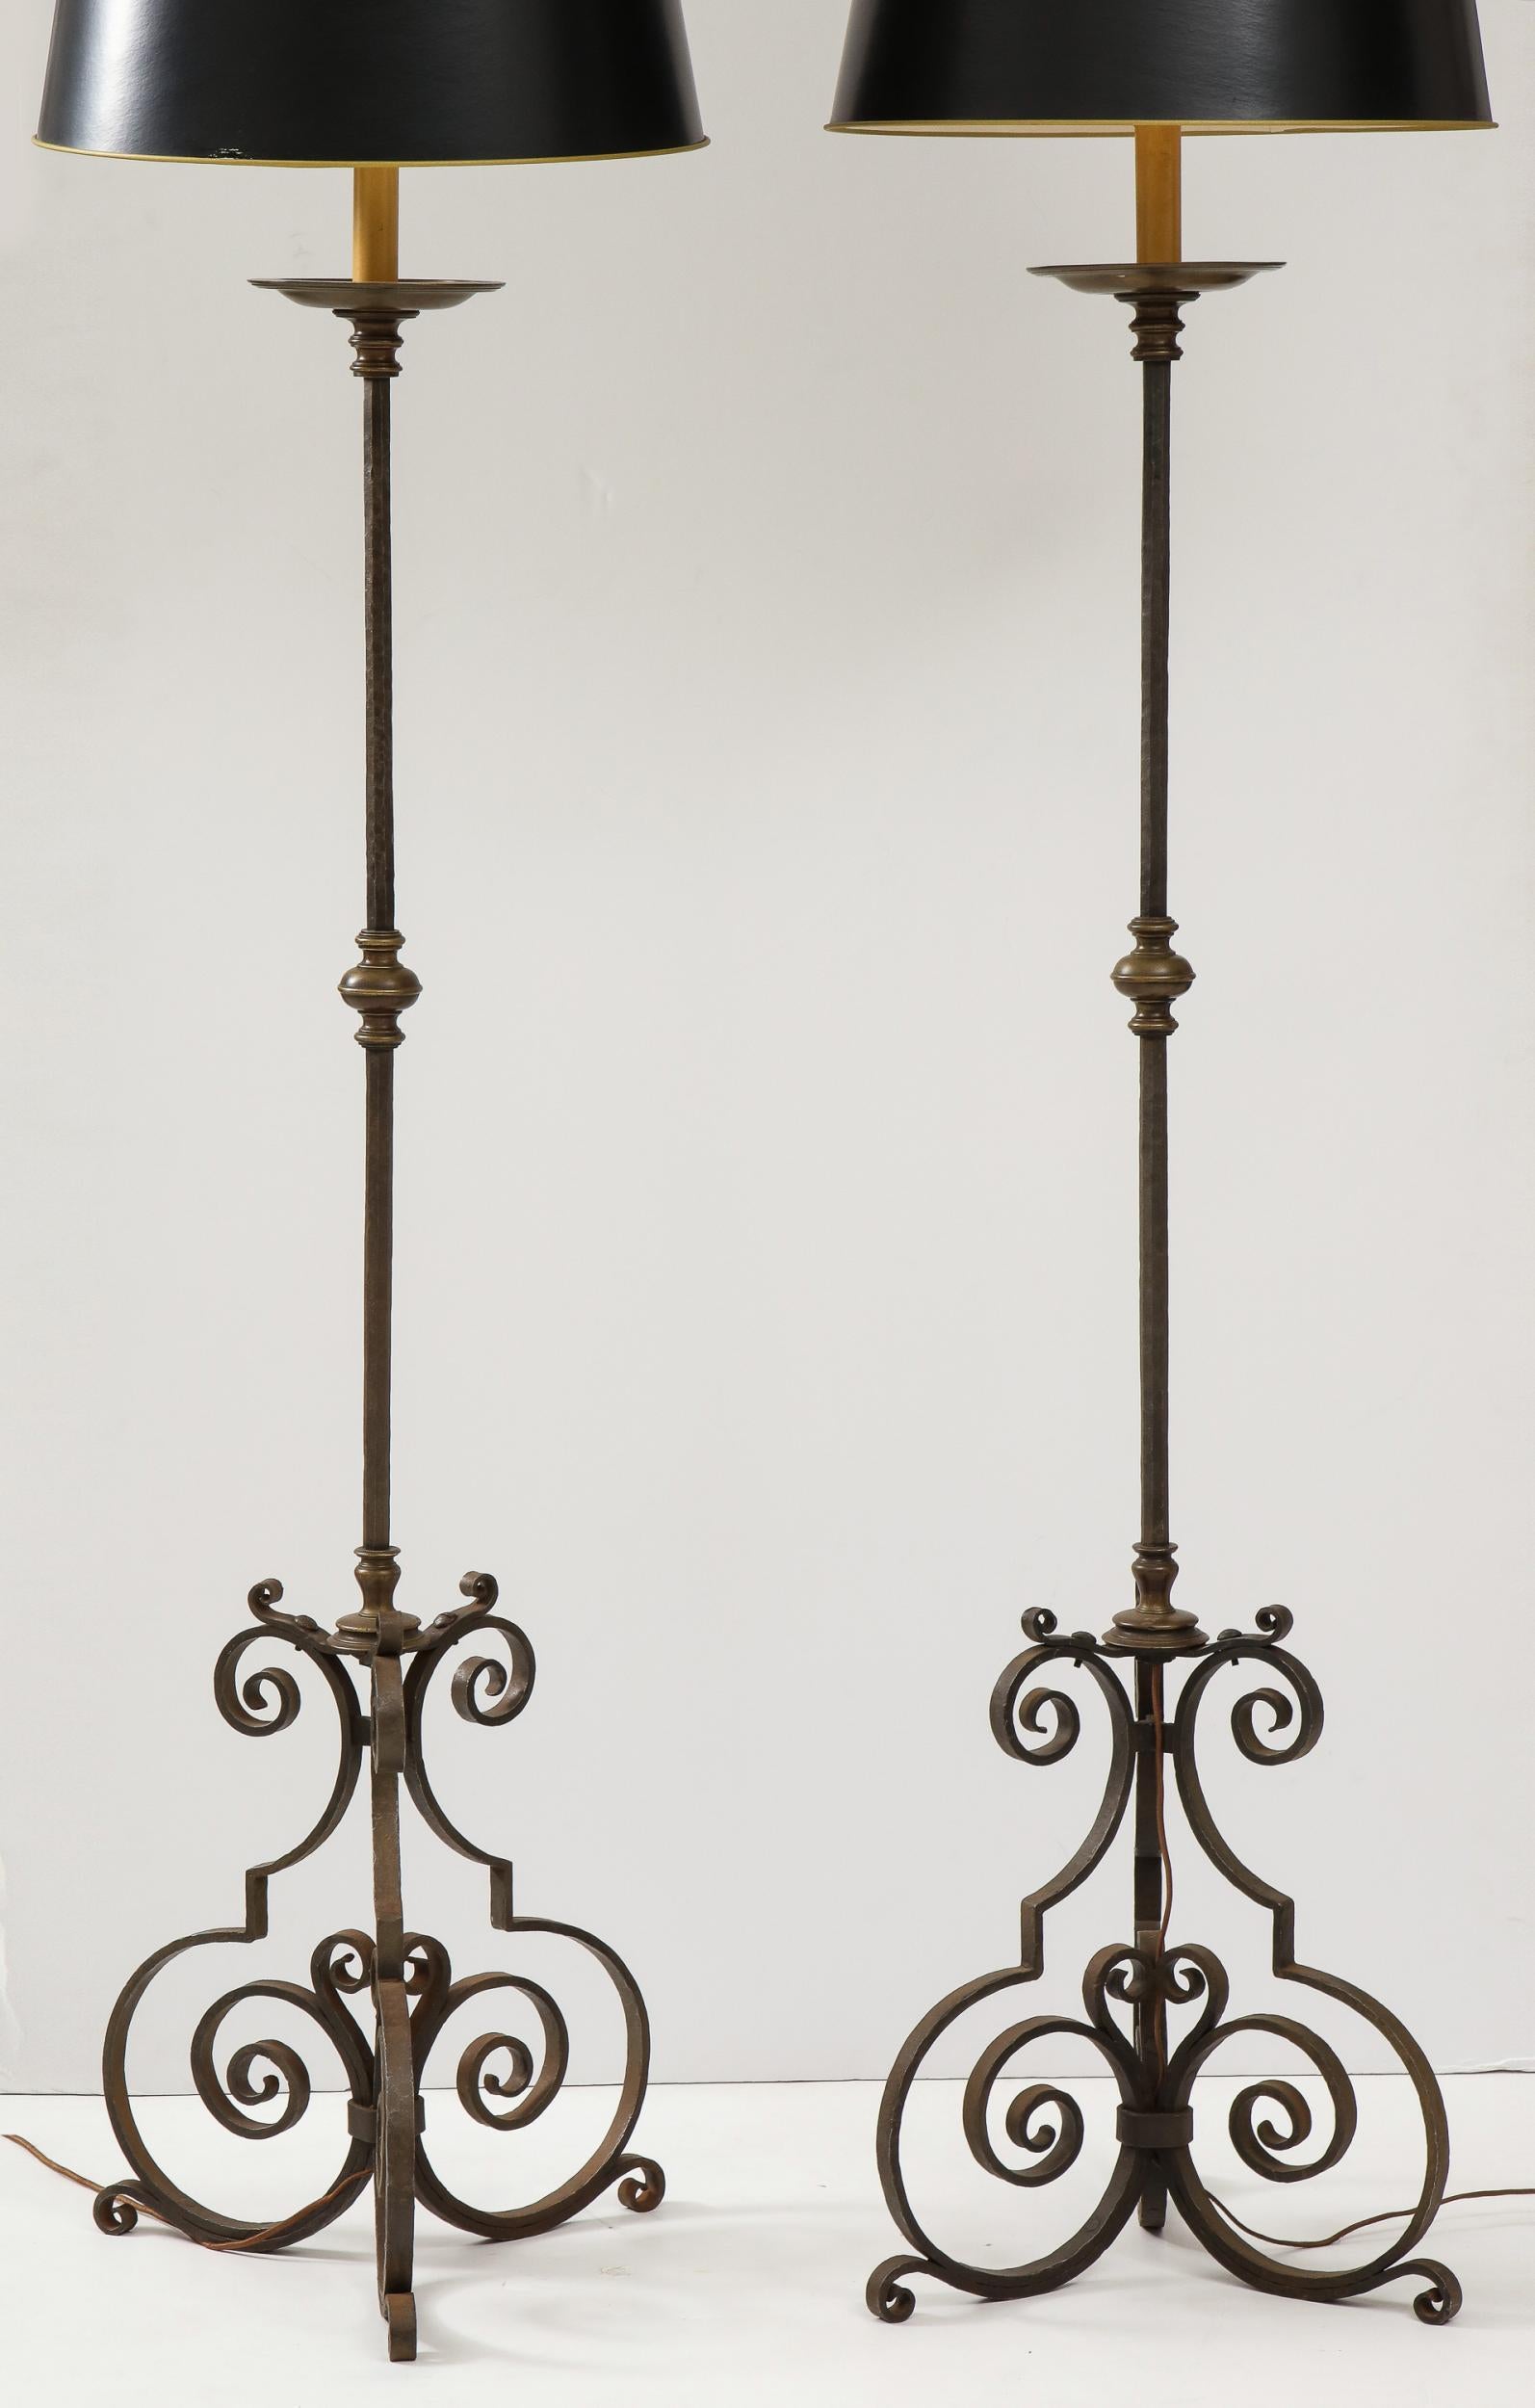 Good pair of Early 20th century wrought iron and brass standard lamps having hand hammered shafts, bronze drip pans and collars and standing on scrolled legs, nicely patinated and of good scale.